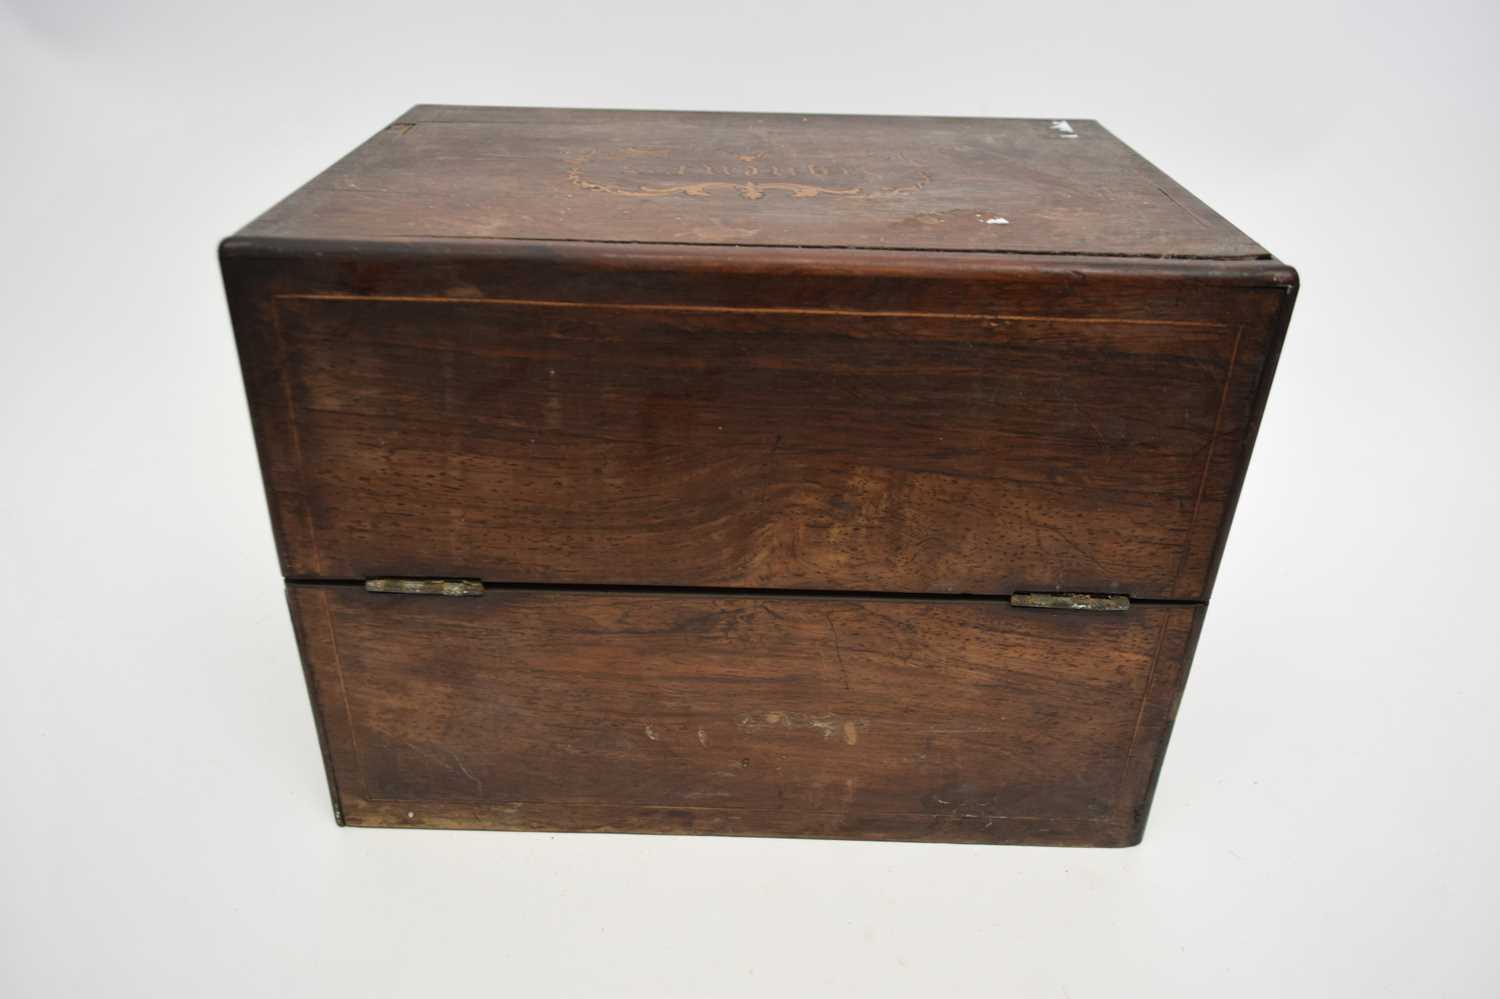 Continental wooden jewellery box with inlaid designs - Image 3 of 4